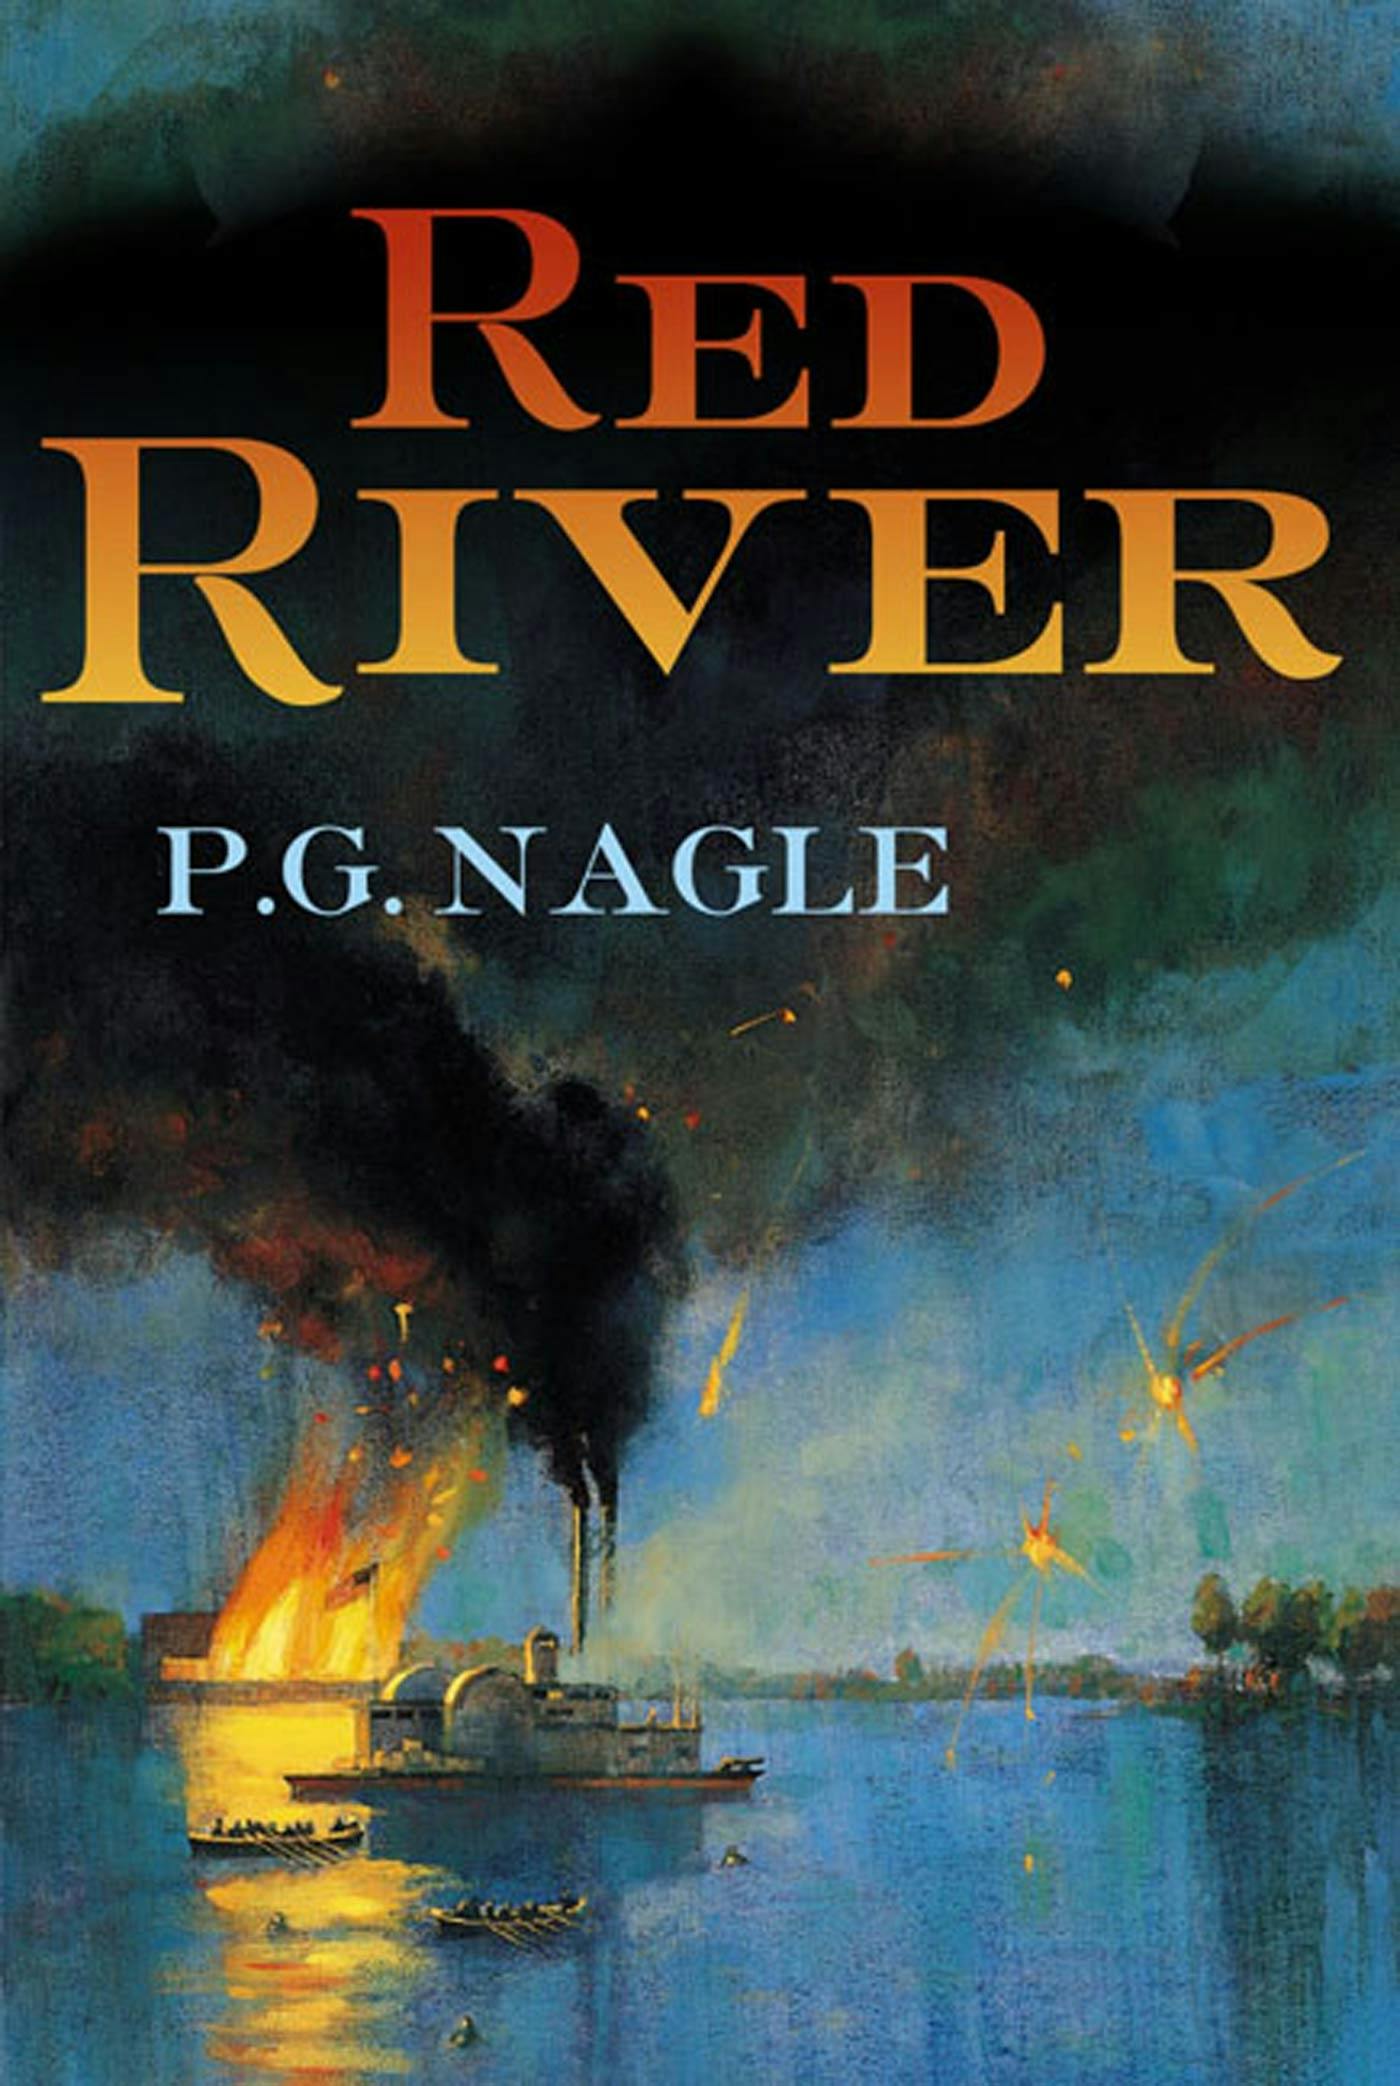 Cover for the book titled as: Red River